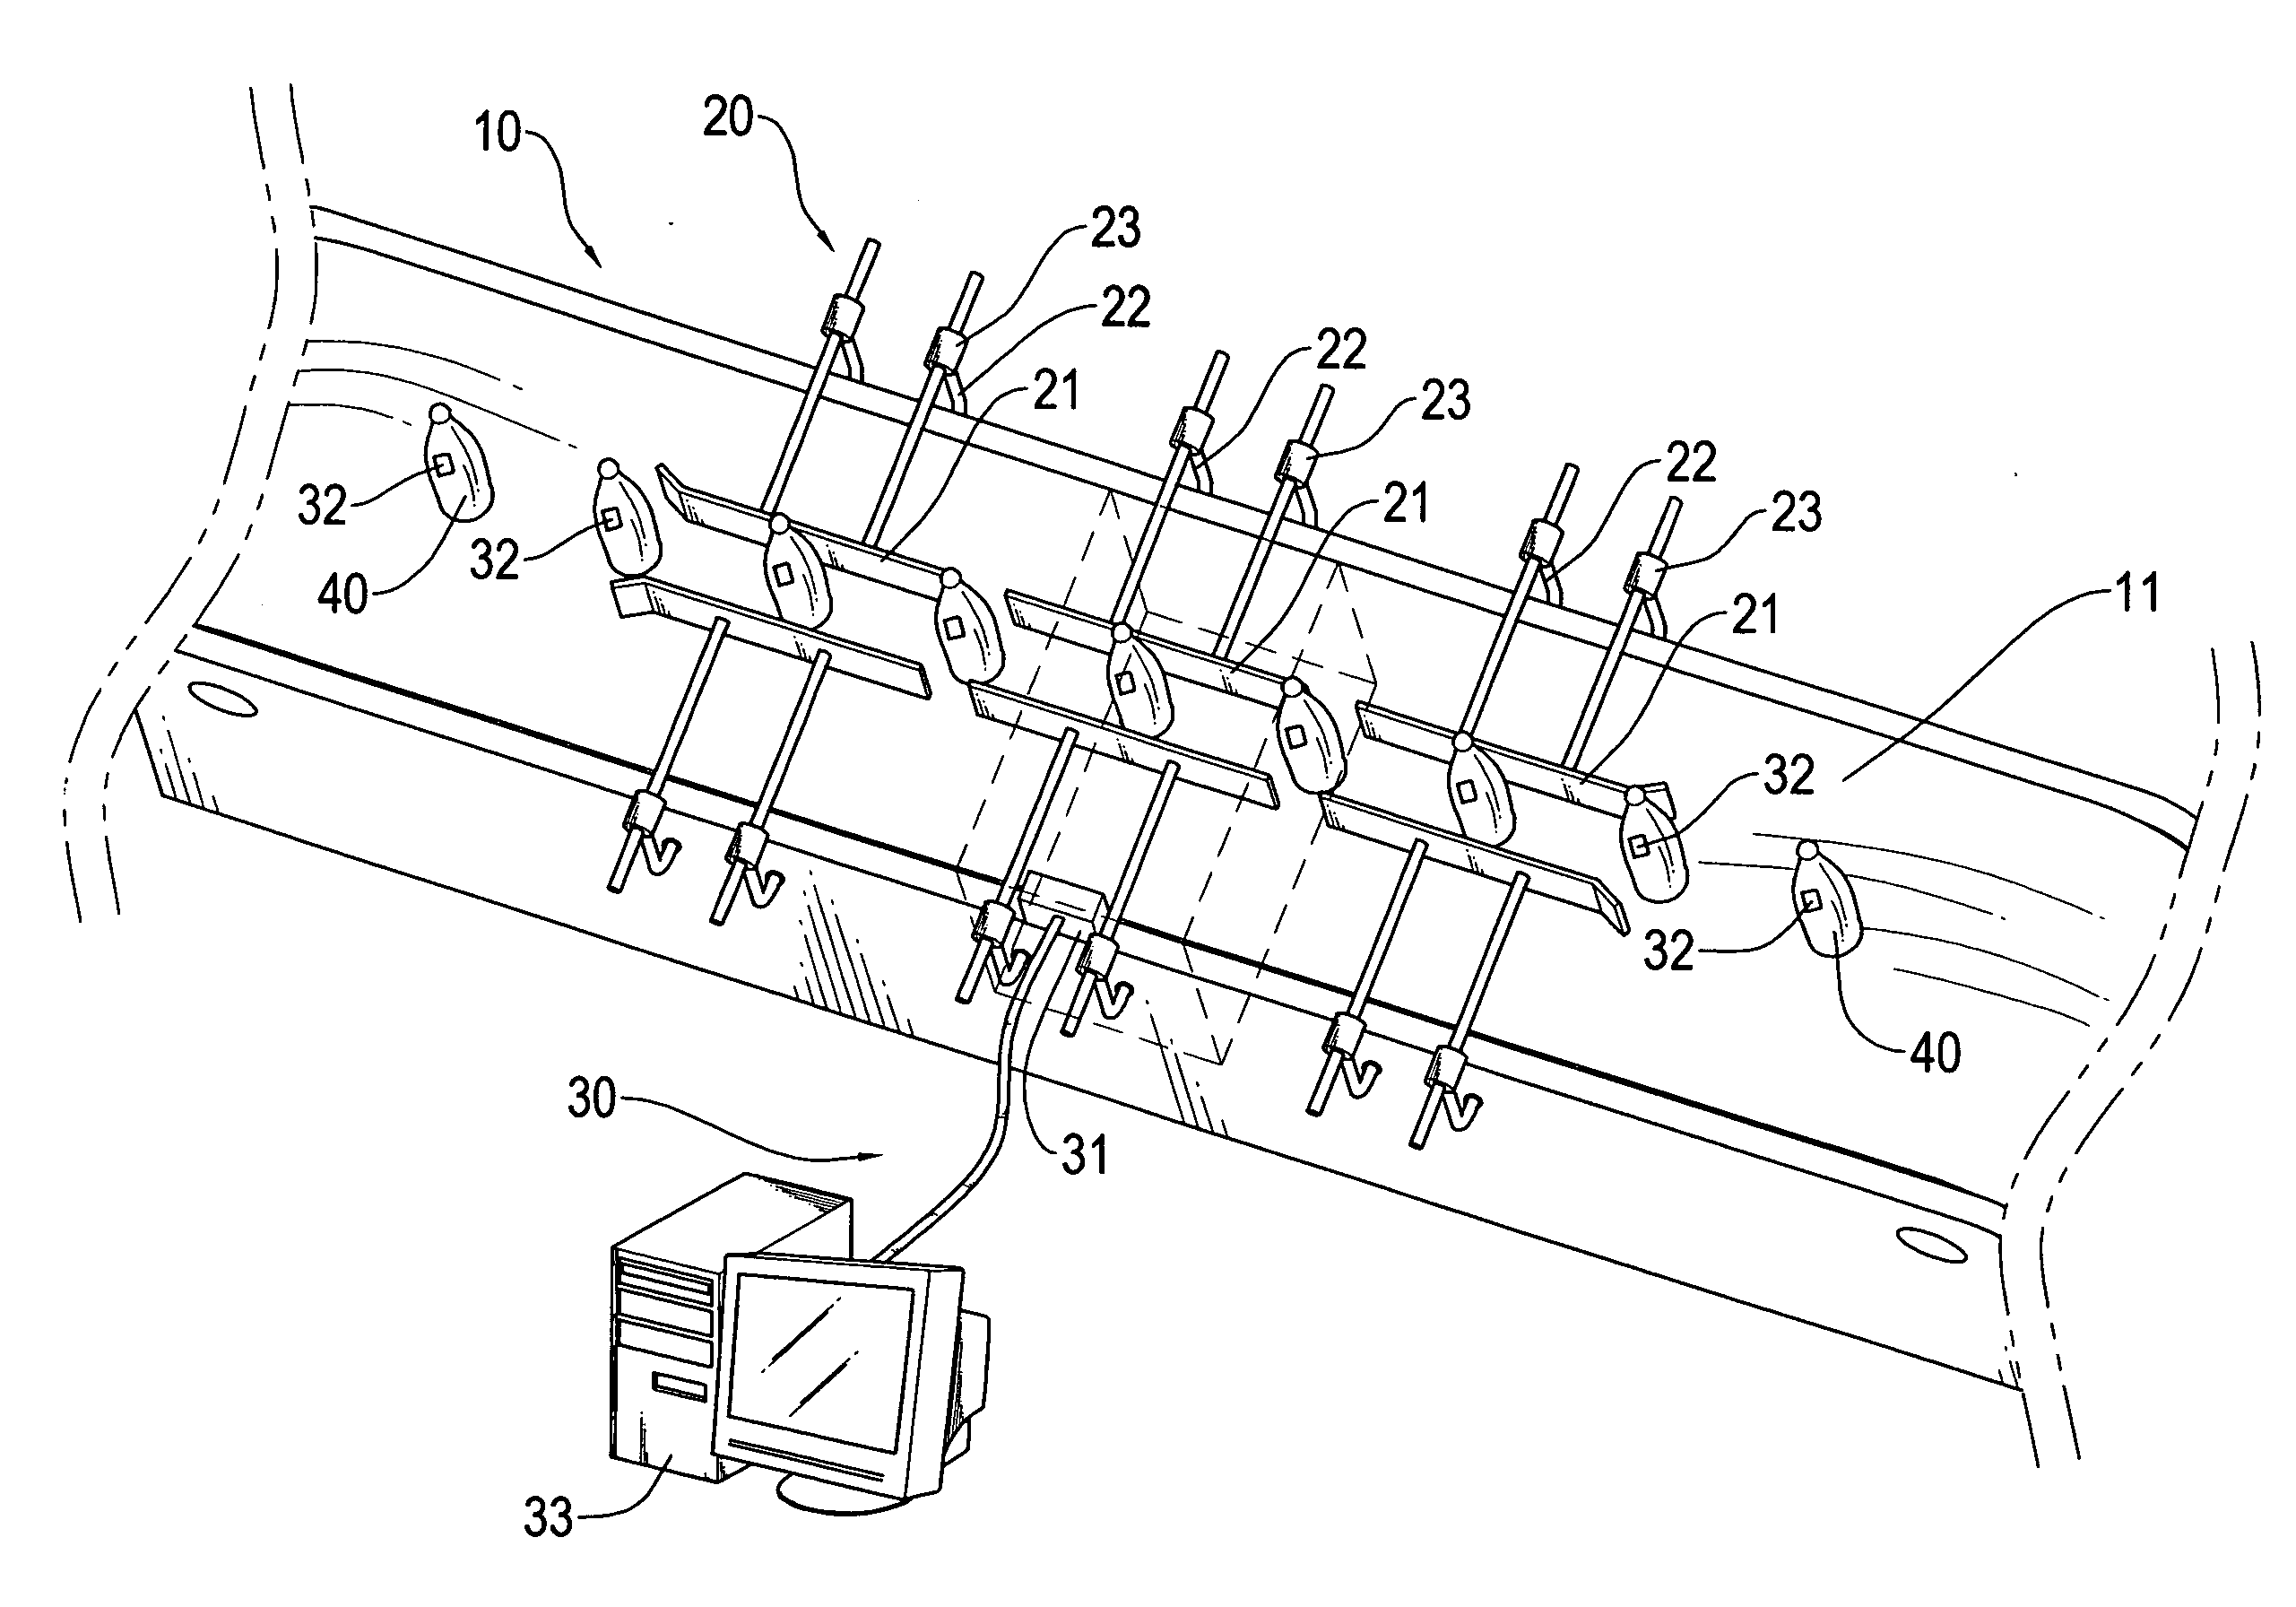 Electronic tag testing device and method